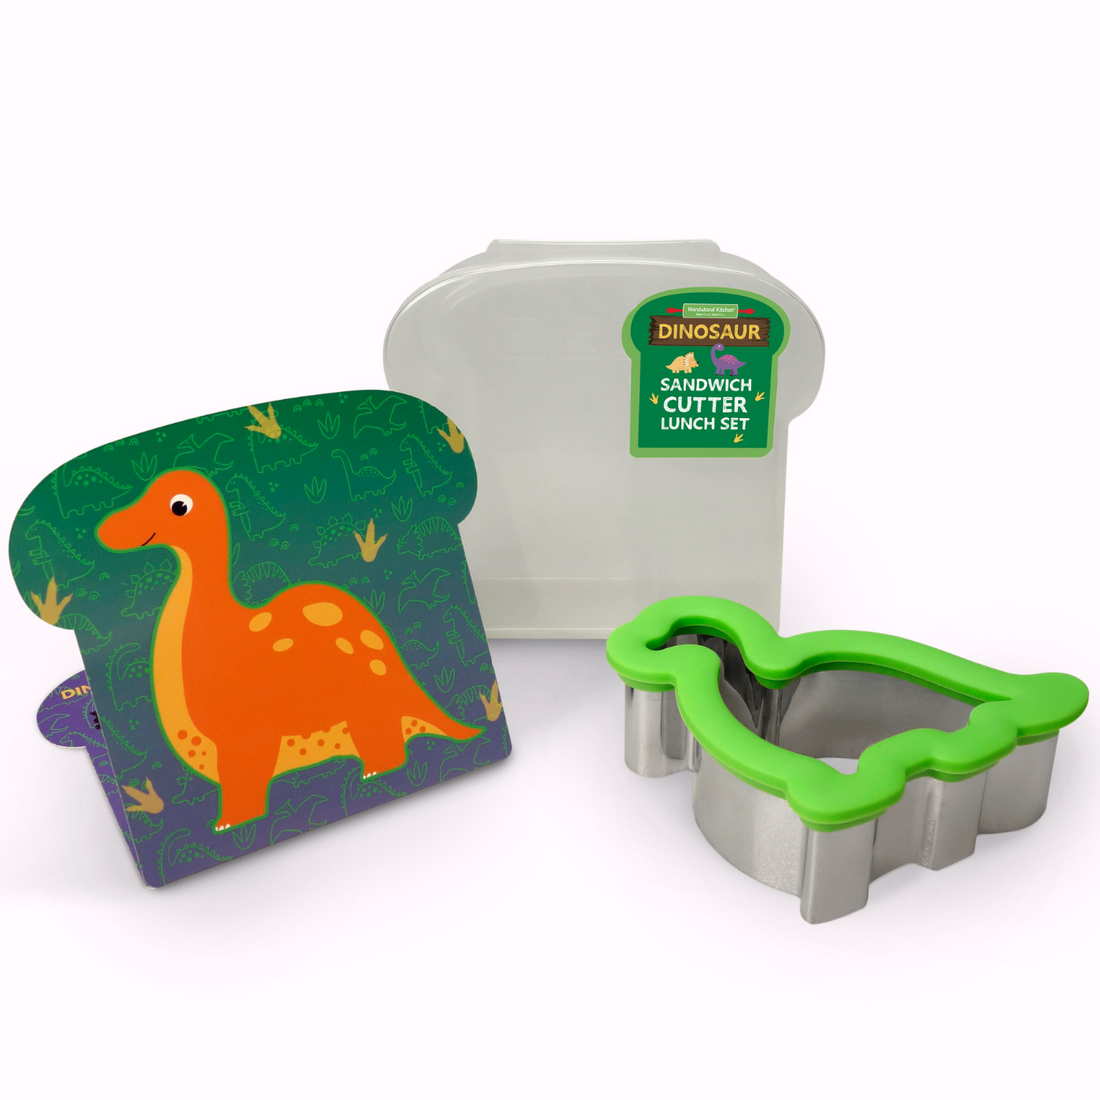 Out of box image of Dinosaur Sandwich Cutter Lunch Set containing 1 dinosaur stainless steel sandwich cutter, 1 sandwich box and recipes